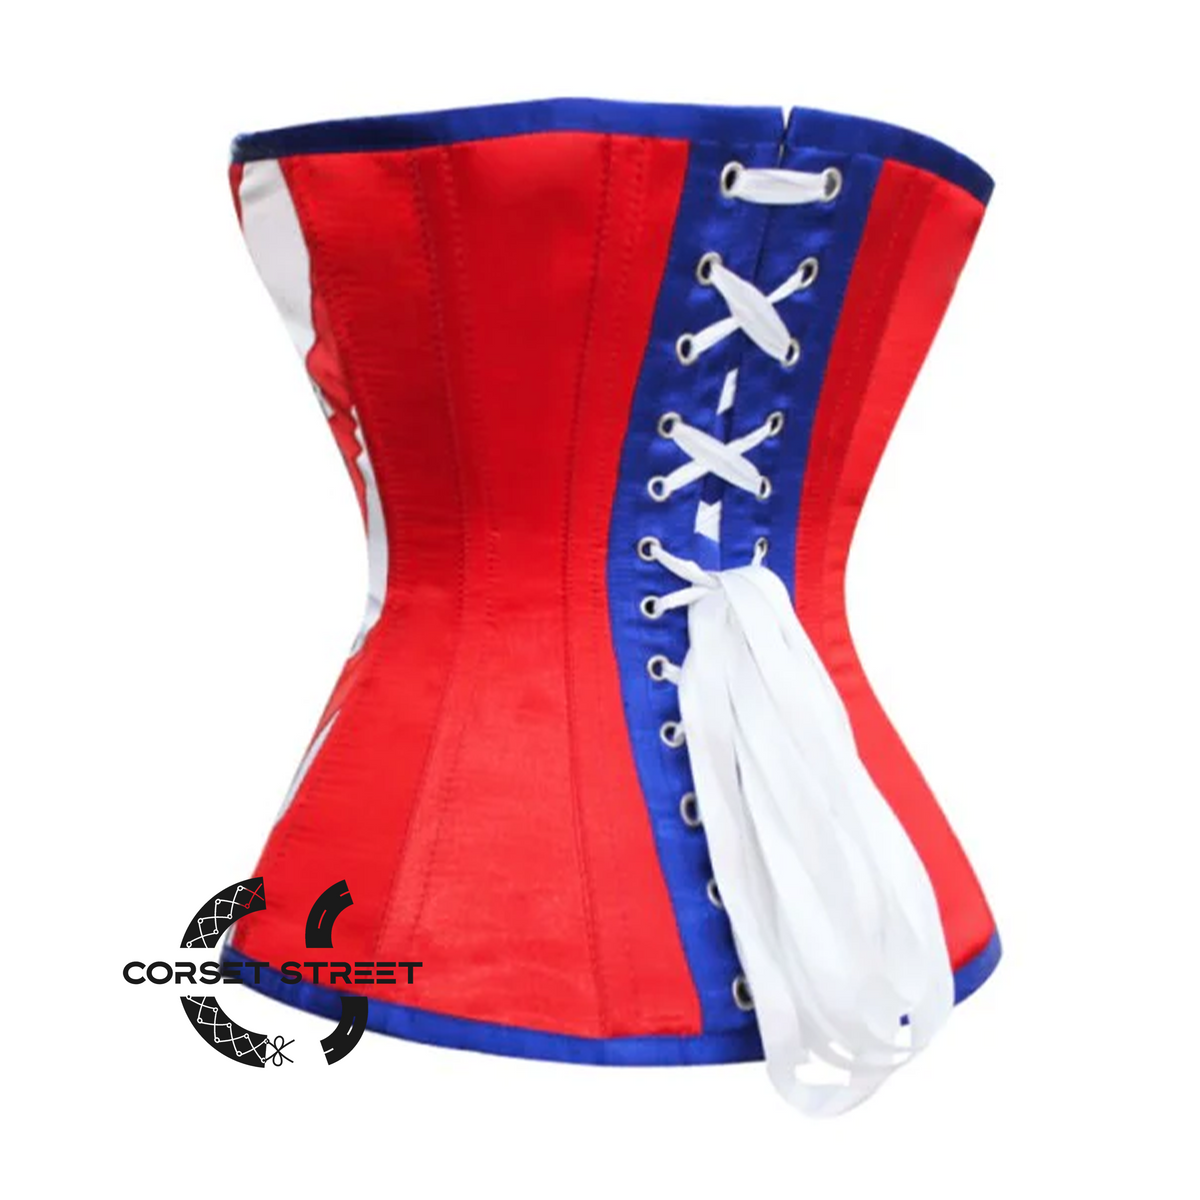 USA Flag Corset Red Strips Blue Satin Gothic Overbust Costume Burlesque Top